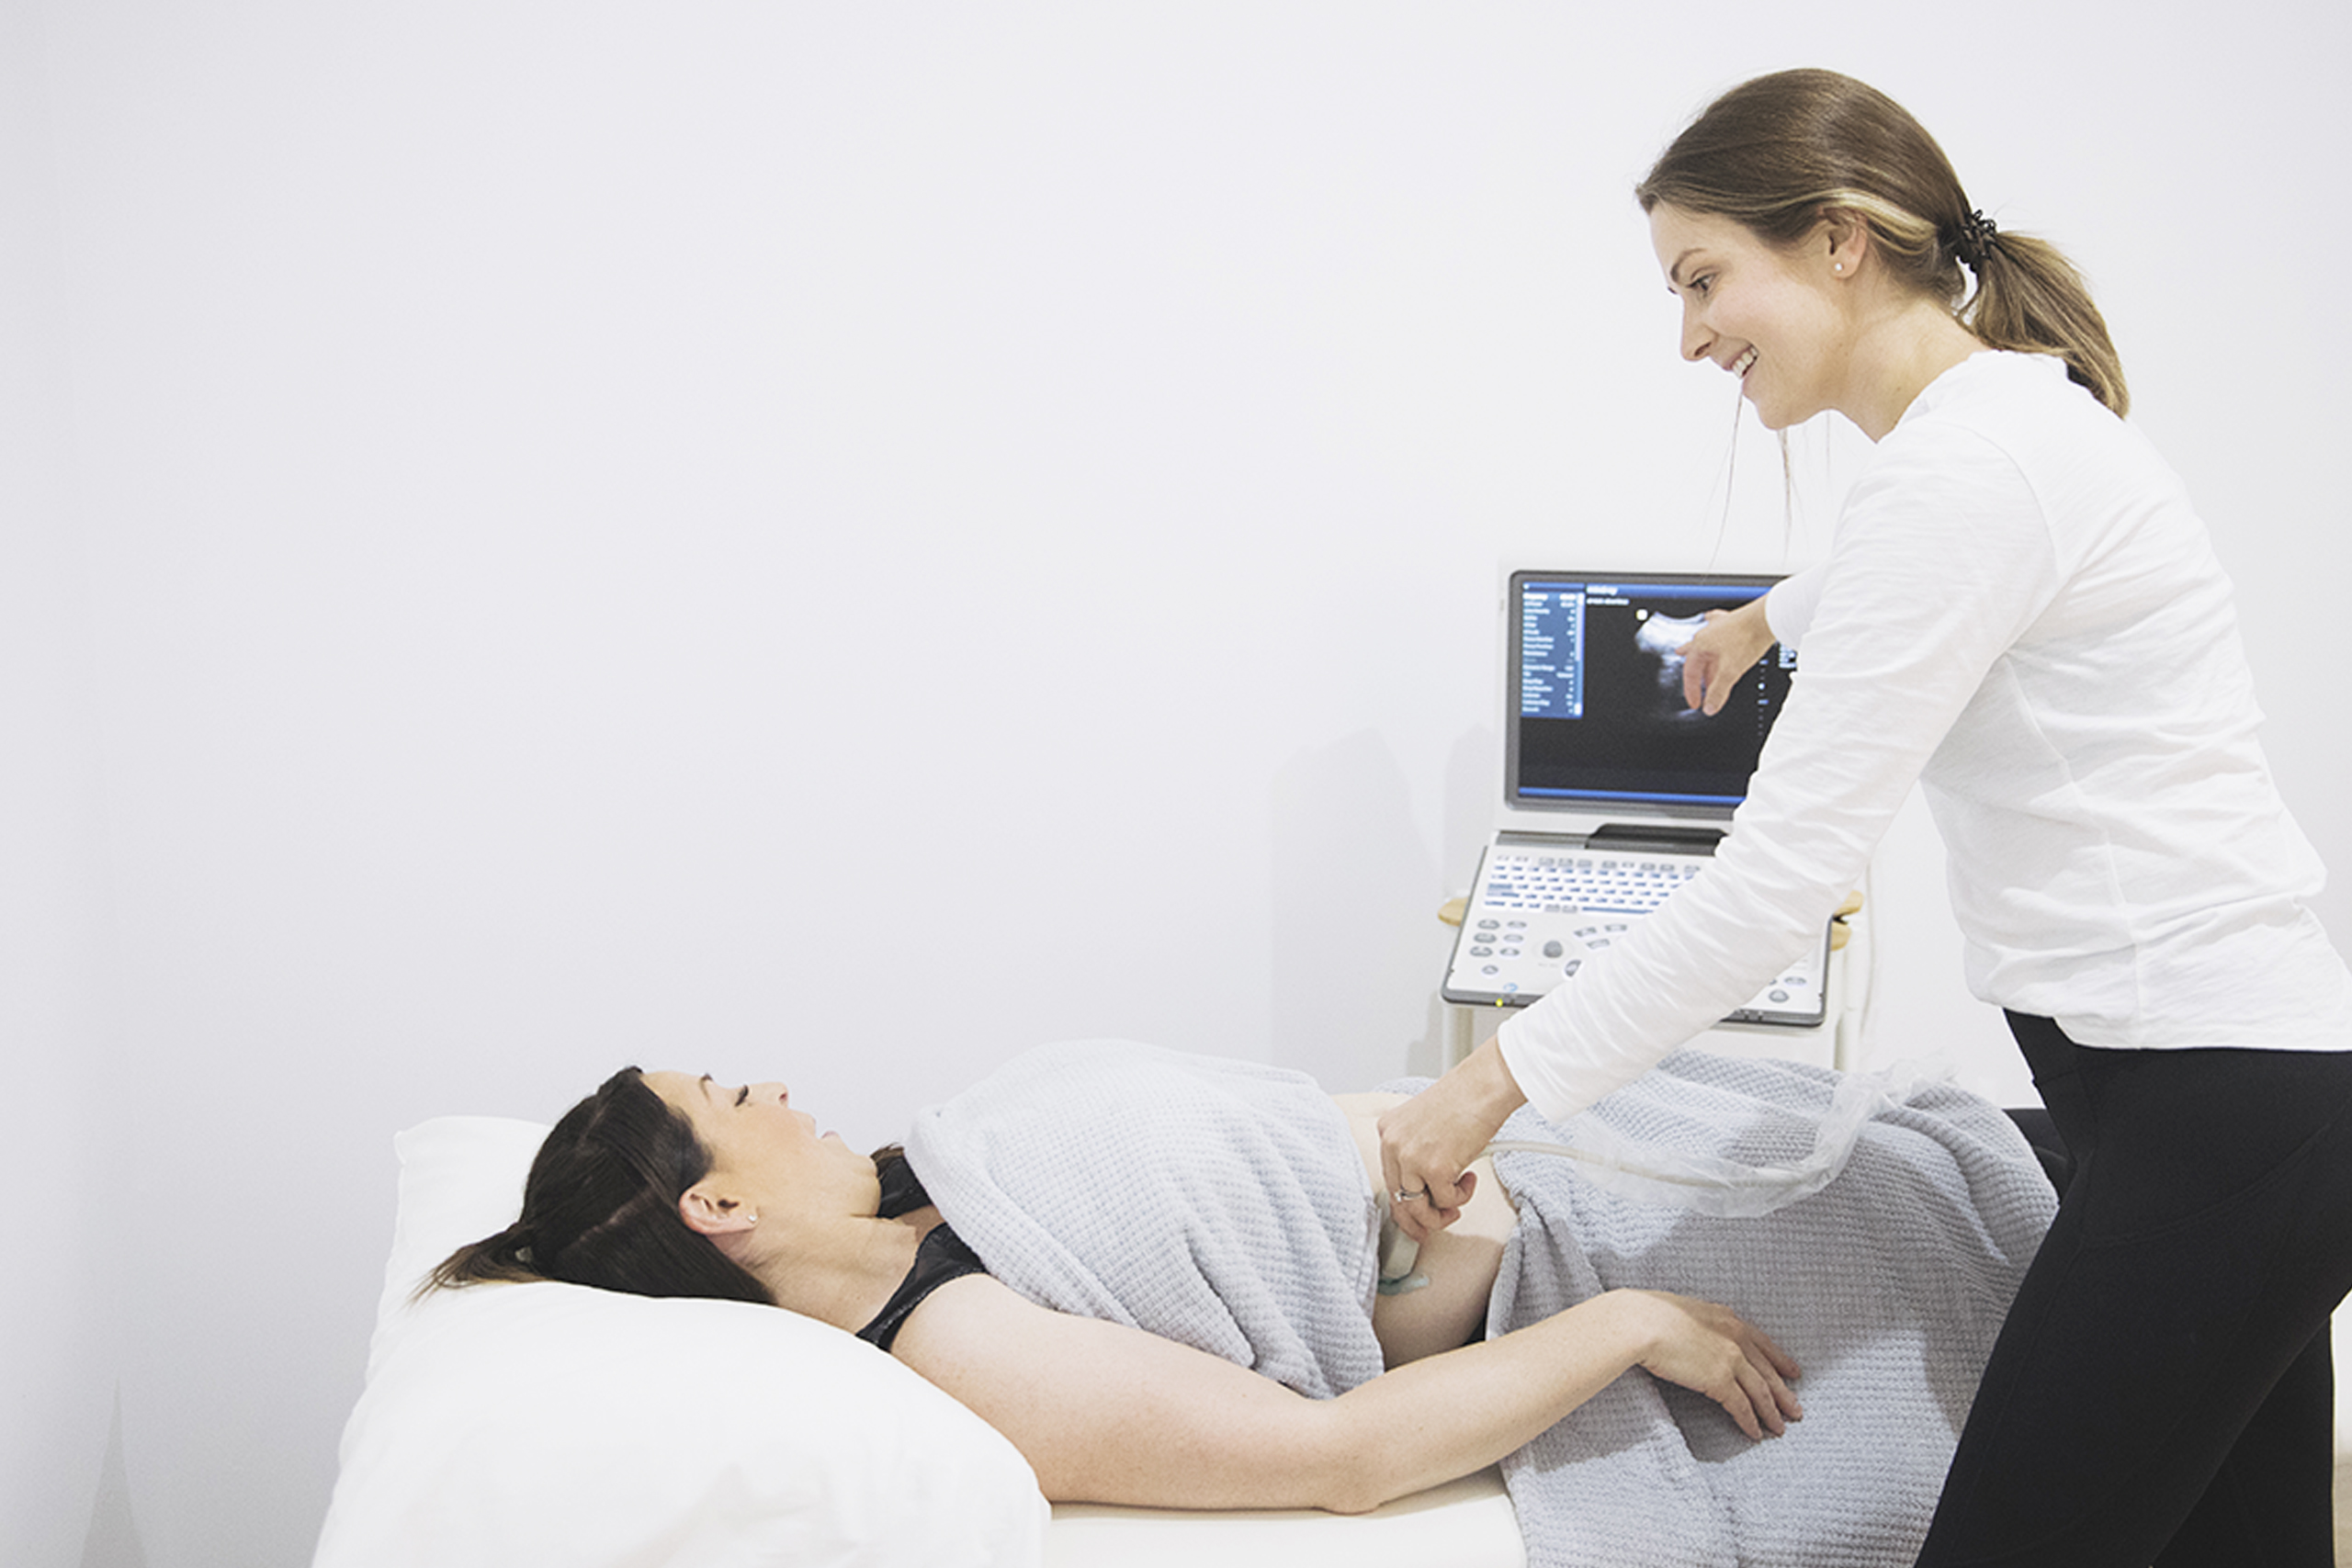 Our Services - Pelvic Floor & Women’s Health Physiotherapy